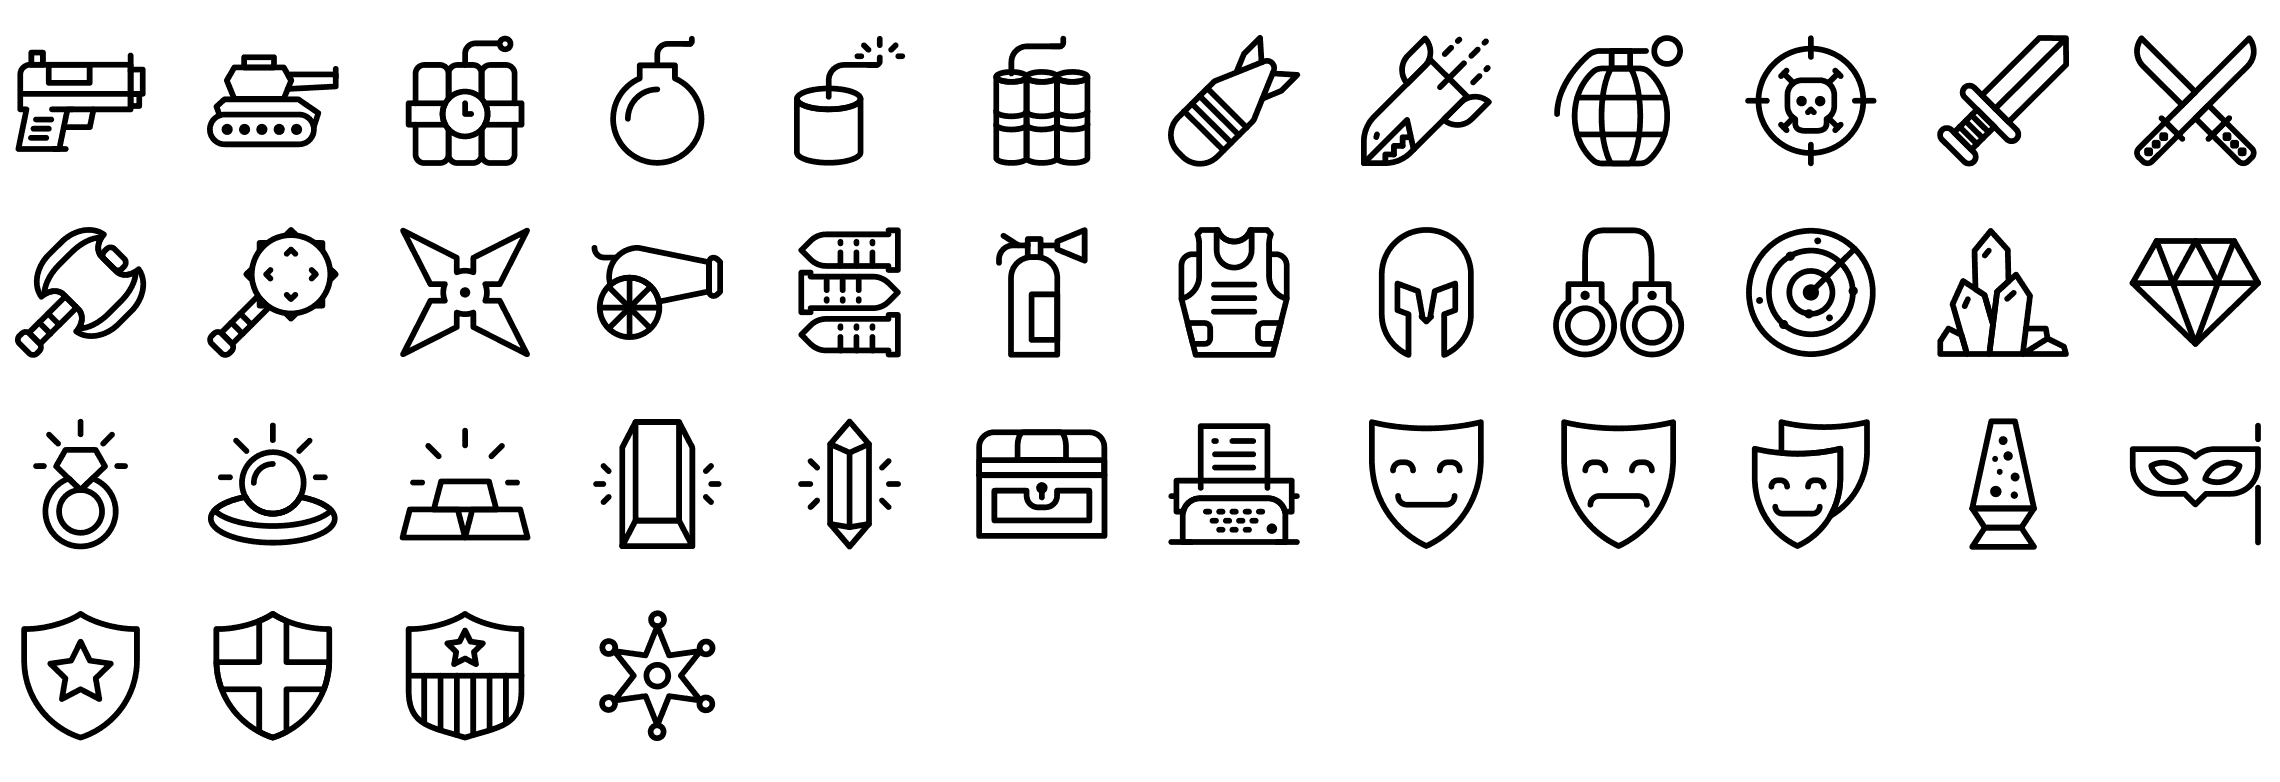 sub-categories-line-icons-preview